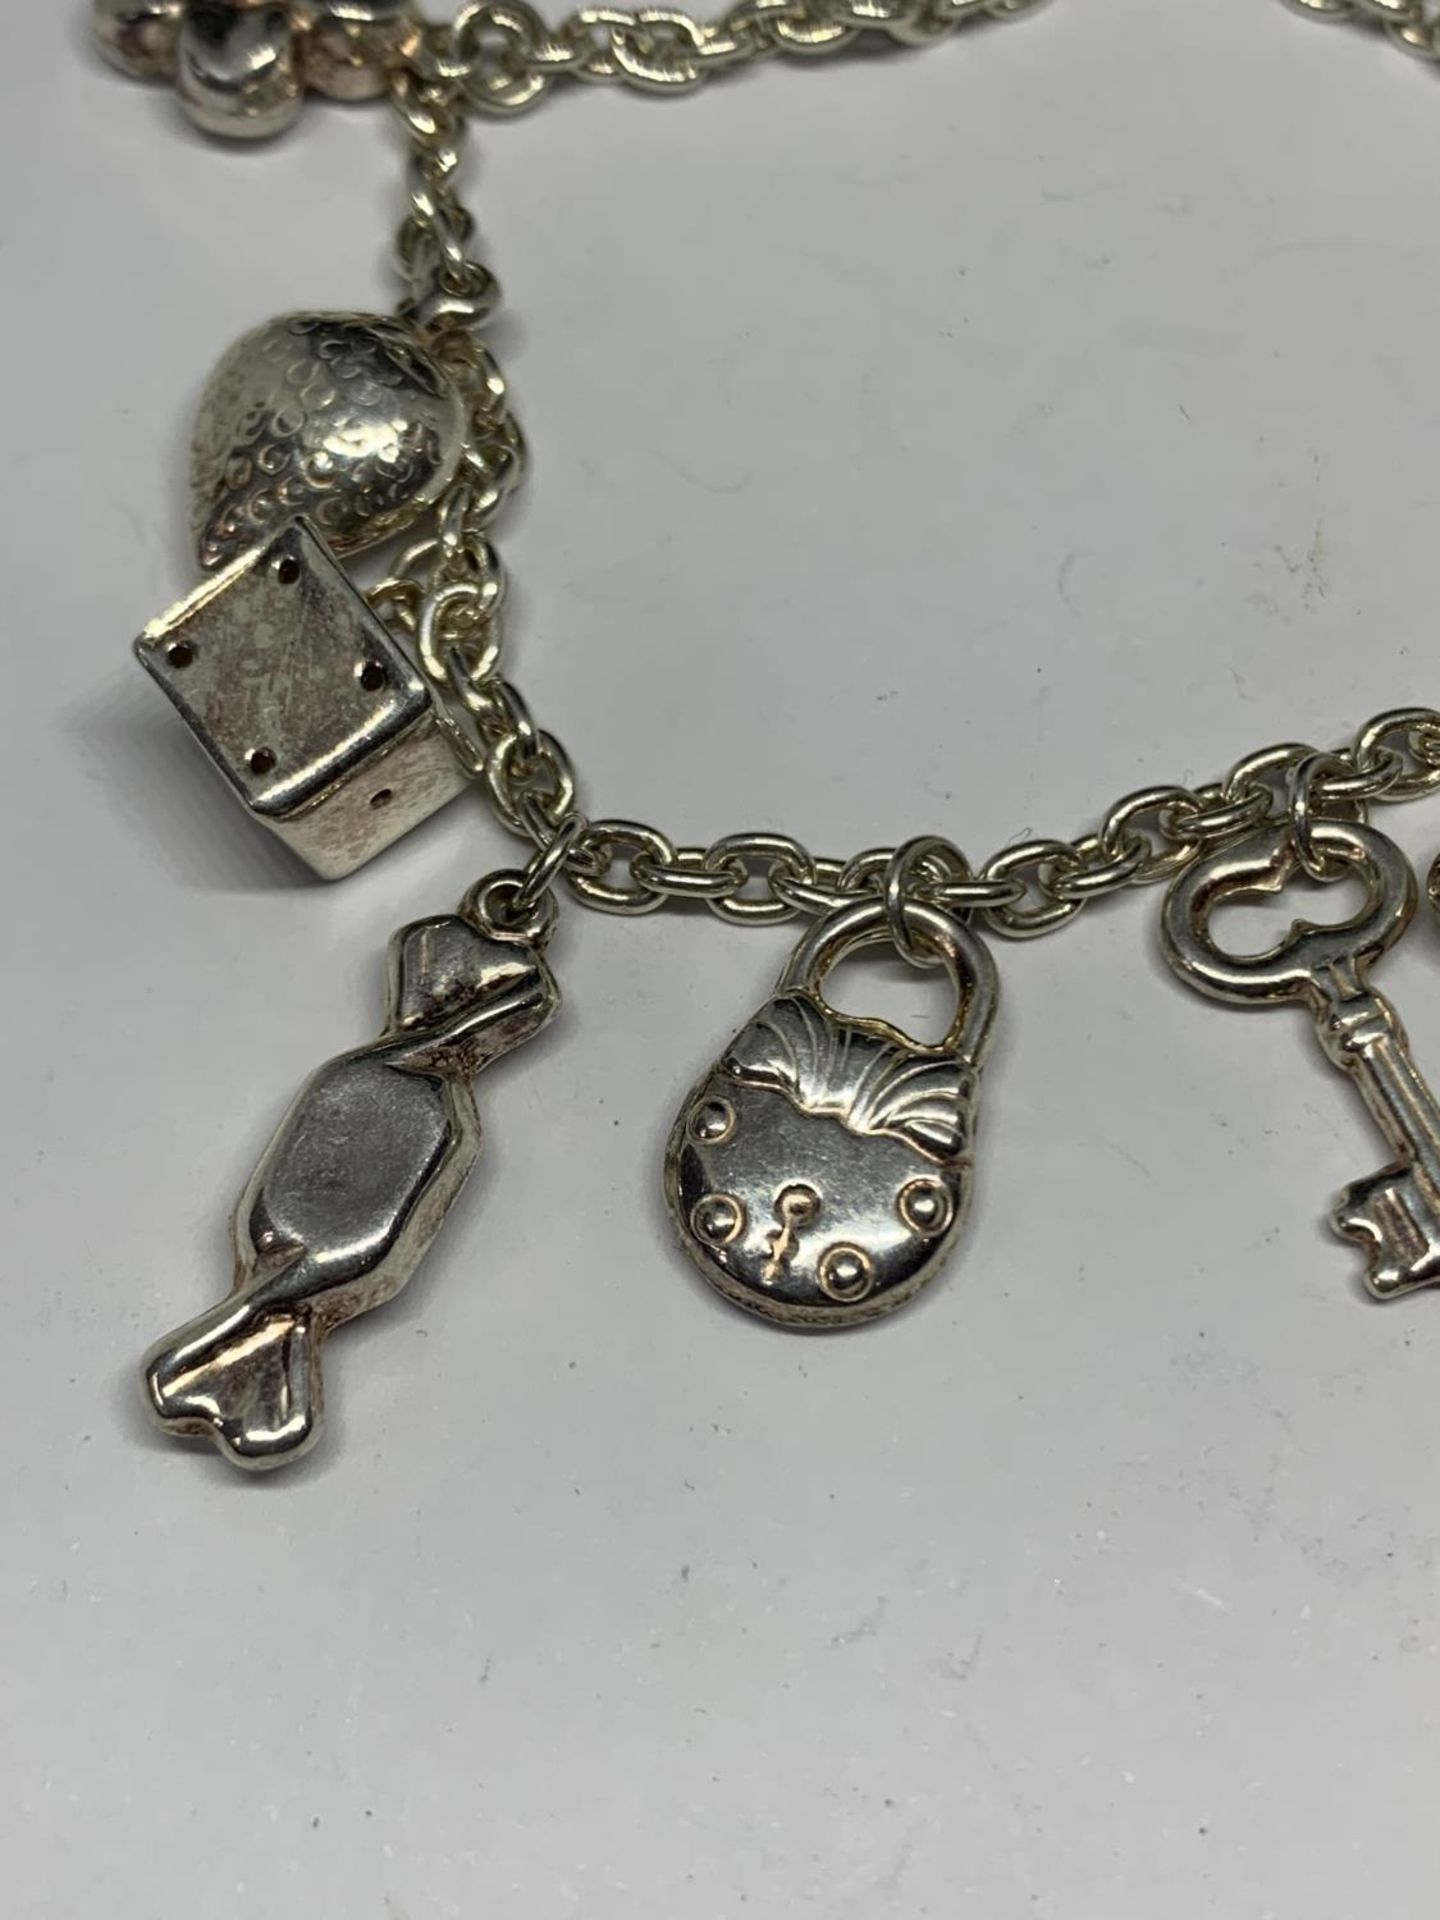 A SILVER BRACELET WITH ELEVEN CHARMS - Image 2 of 4